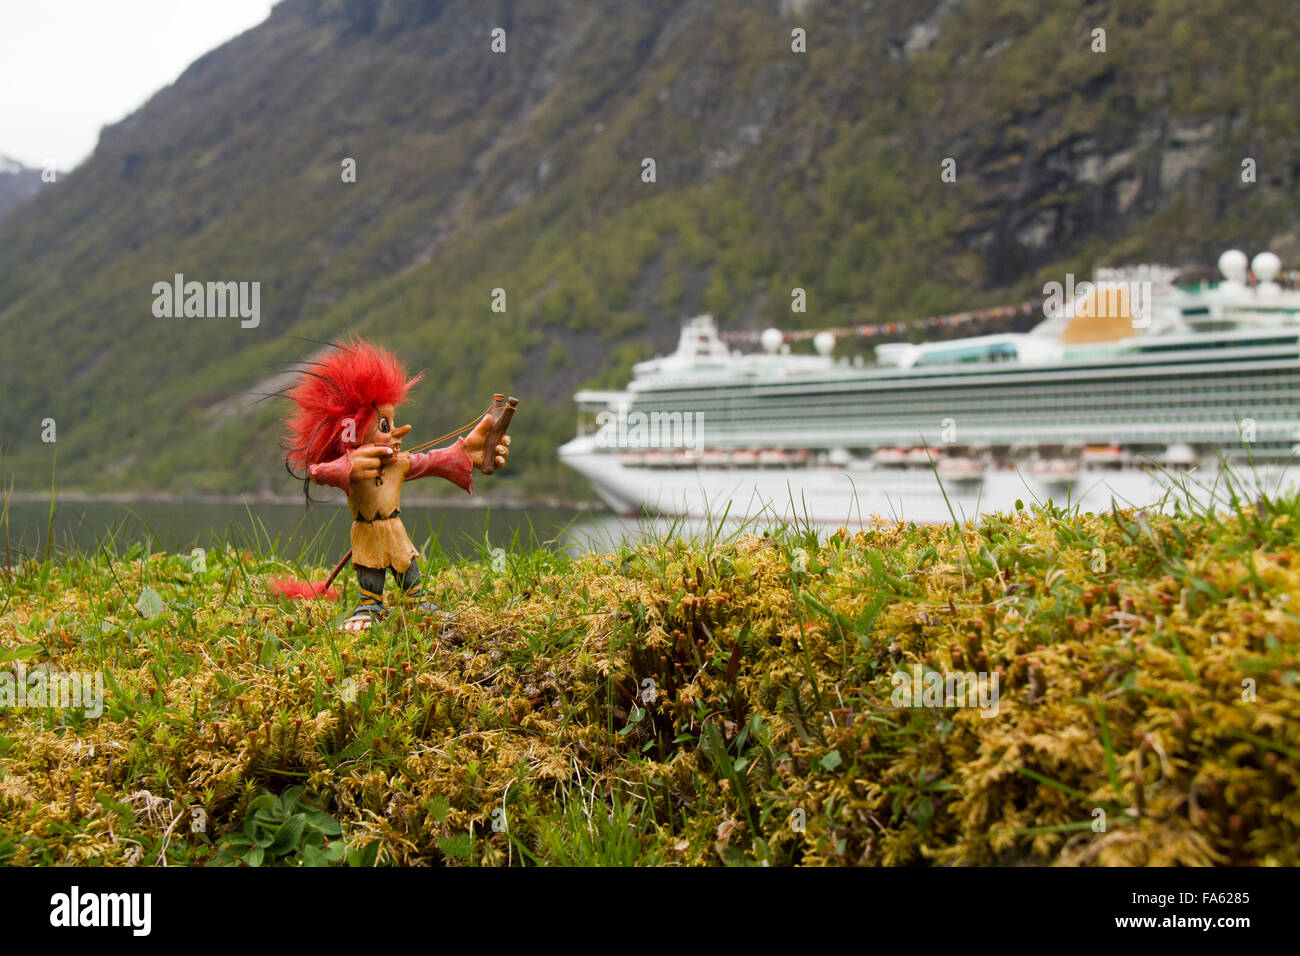 Troll standing on a bank firing a catapult at the P&O cruise ship Ventura. Stock Photo